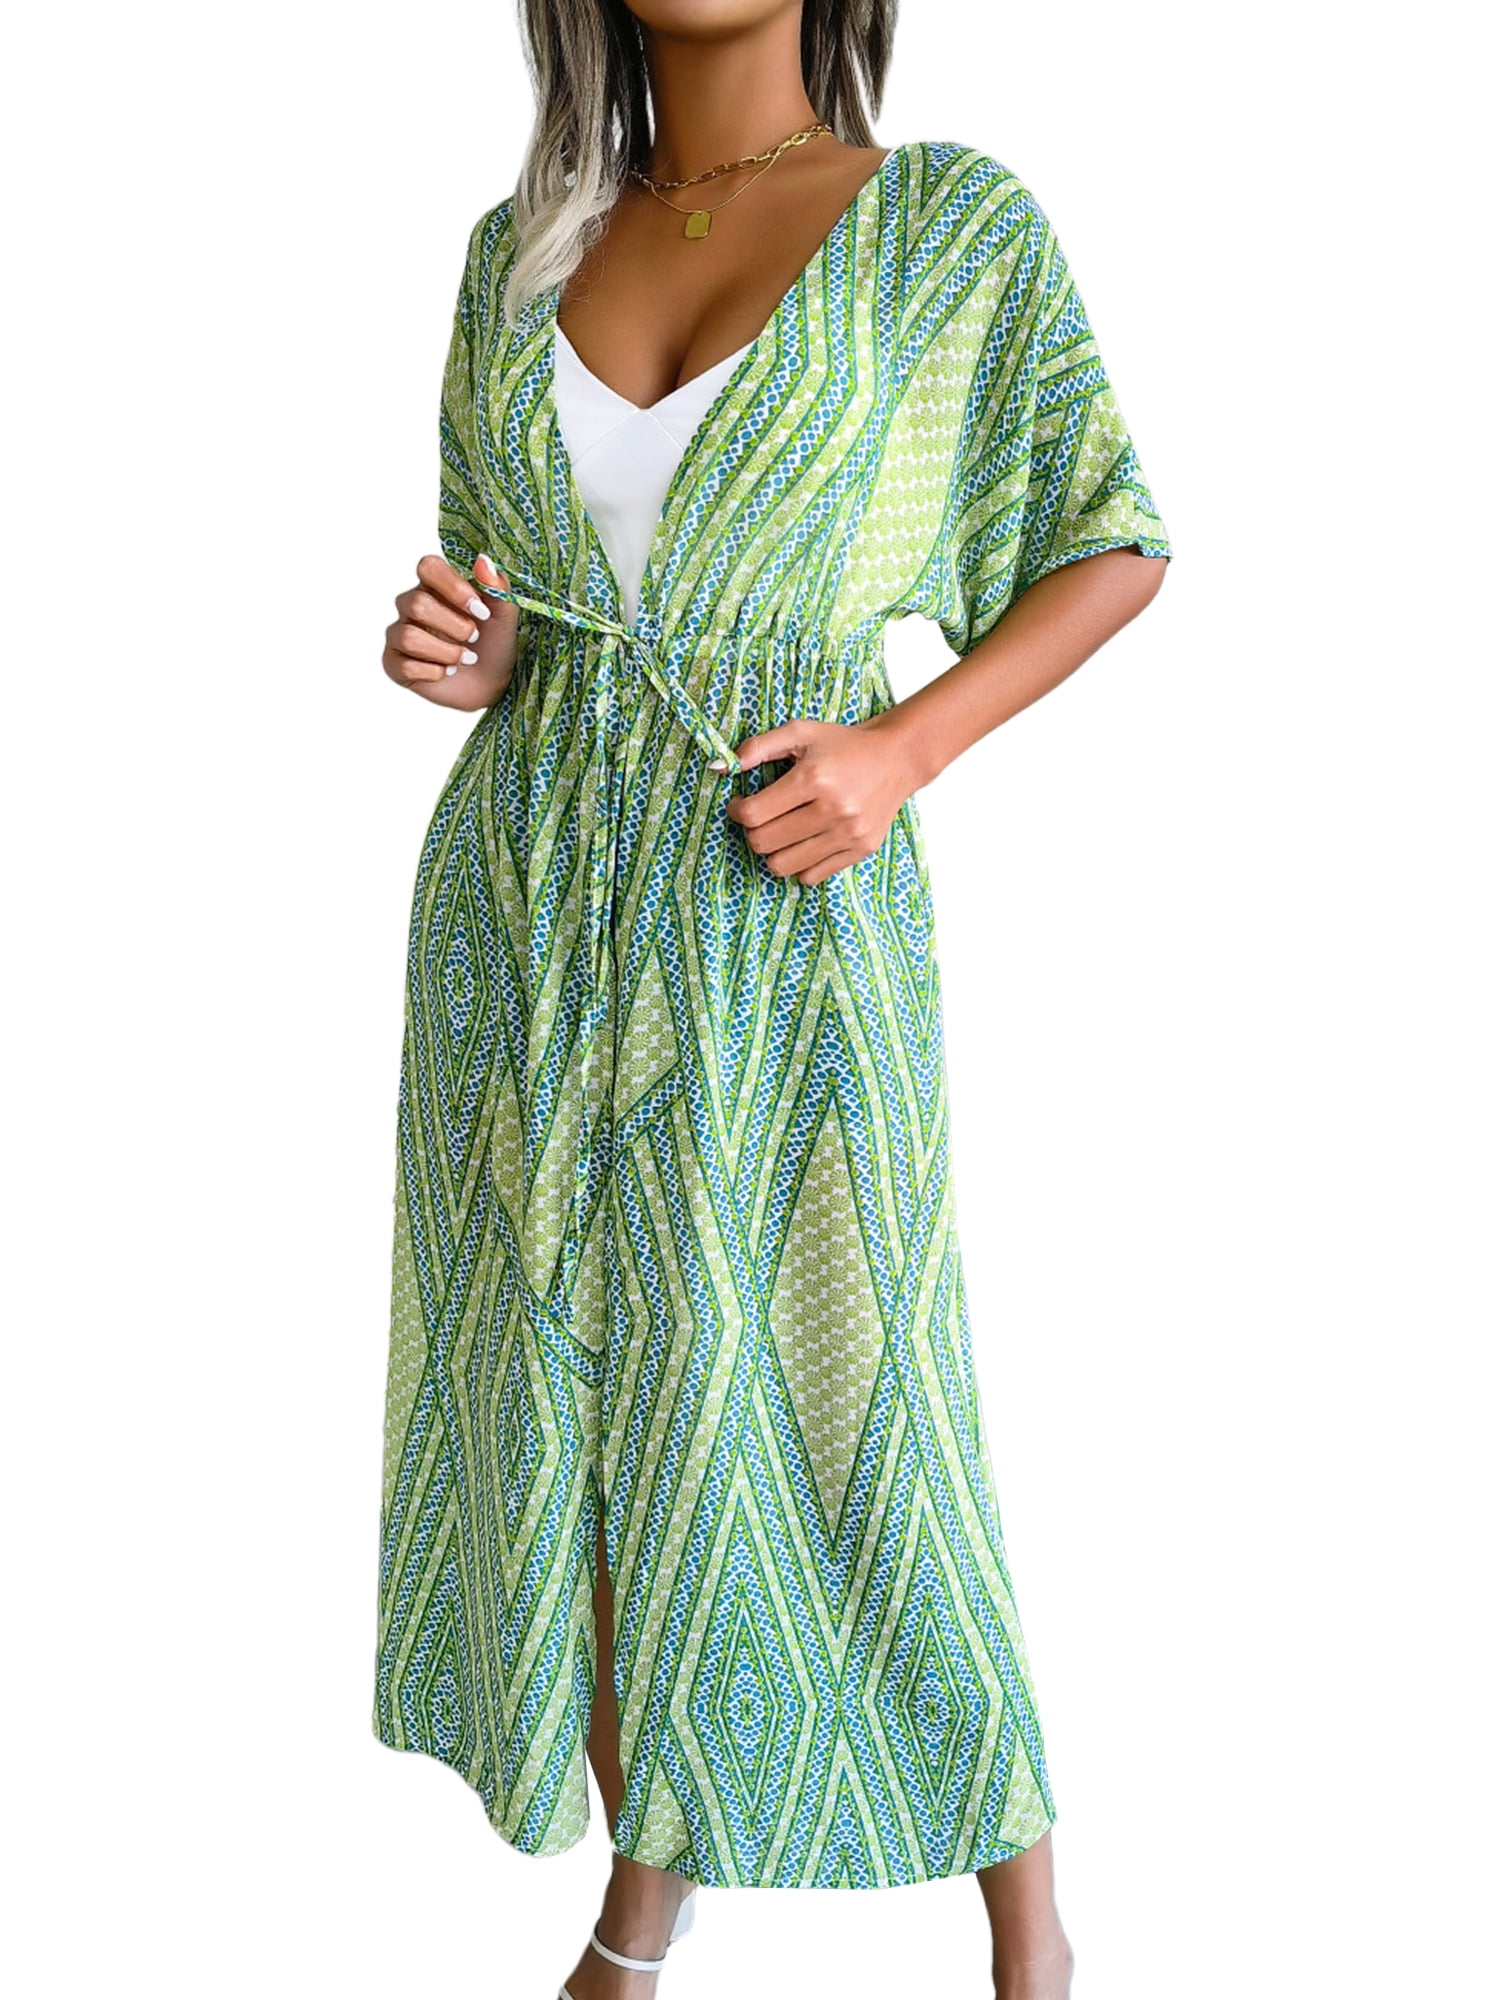 Lumento Women Loose Kaftan Swimsuit Cover Up Beach Long Casual Caftan Dress Holiday Party